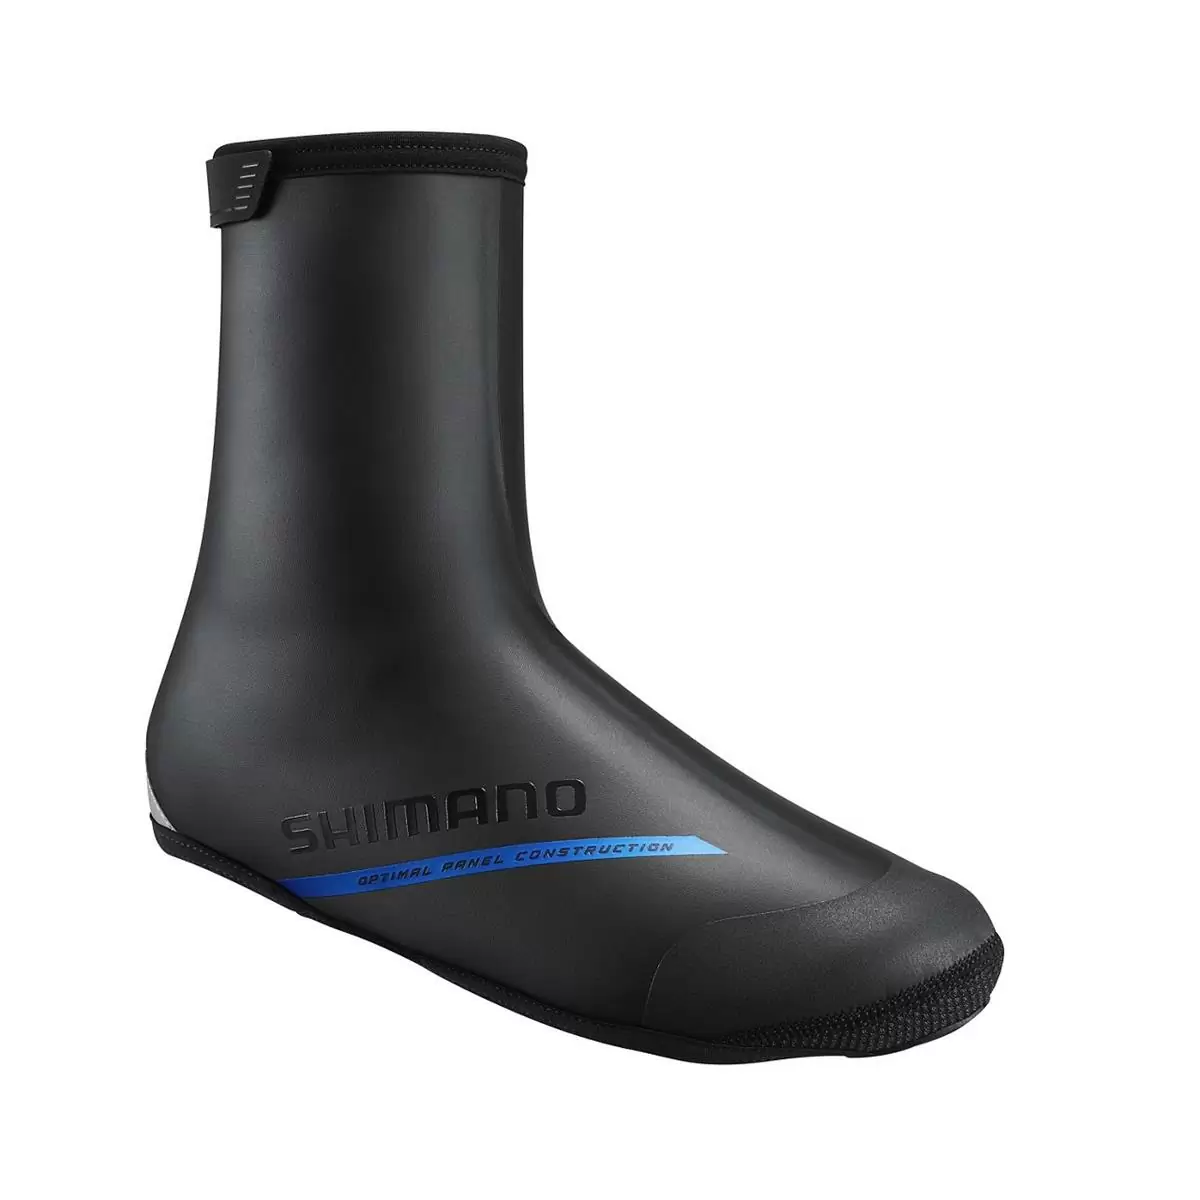 Pair of Winter Shoe Covers MTB Cross Country XC Waterproof Thermal Black Size L (42-44) - image